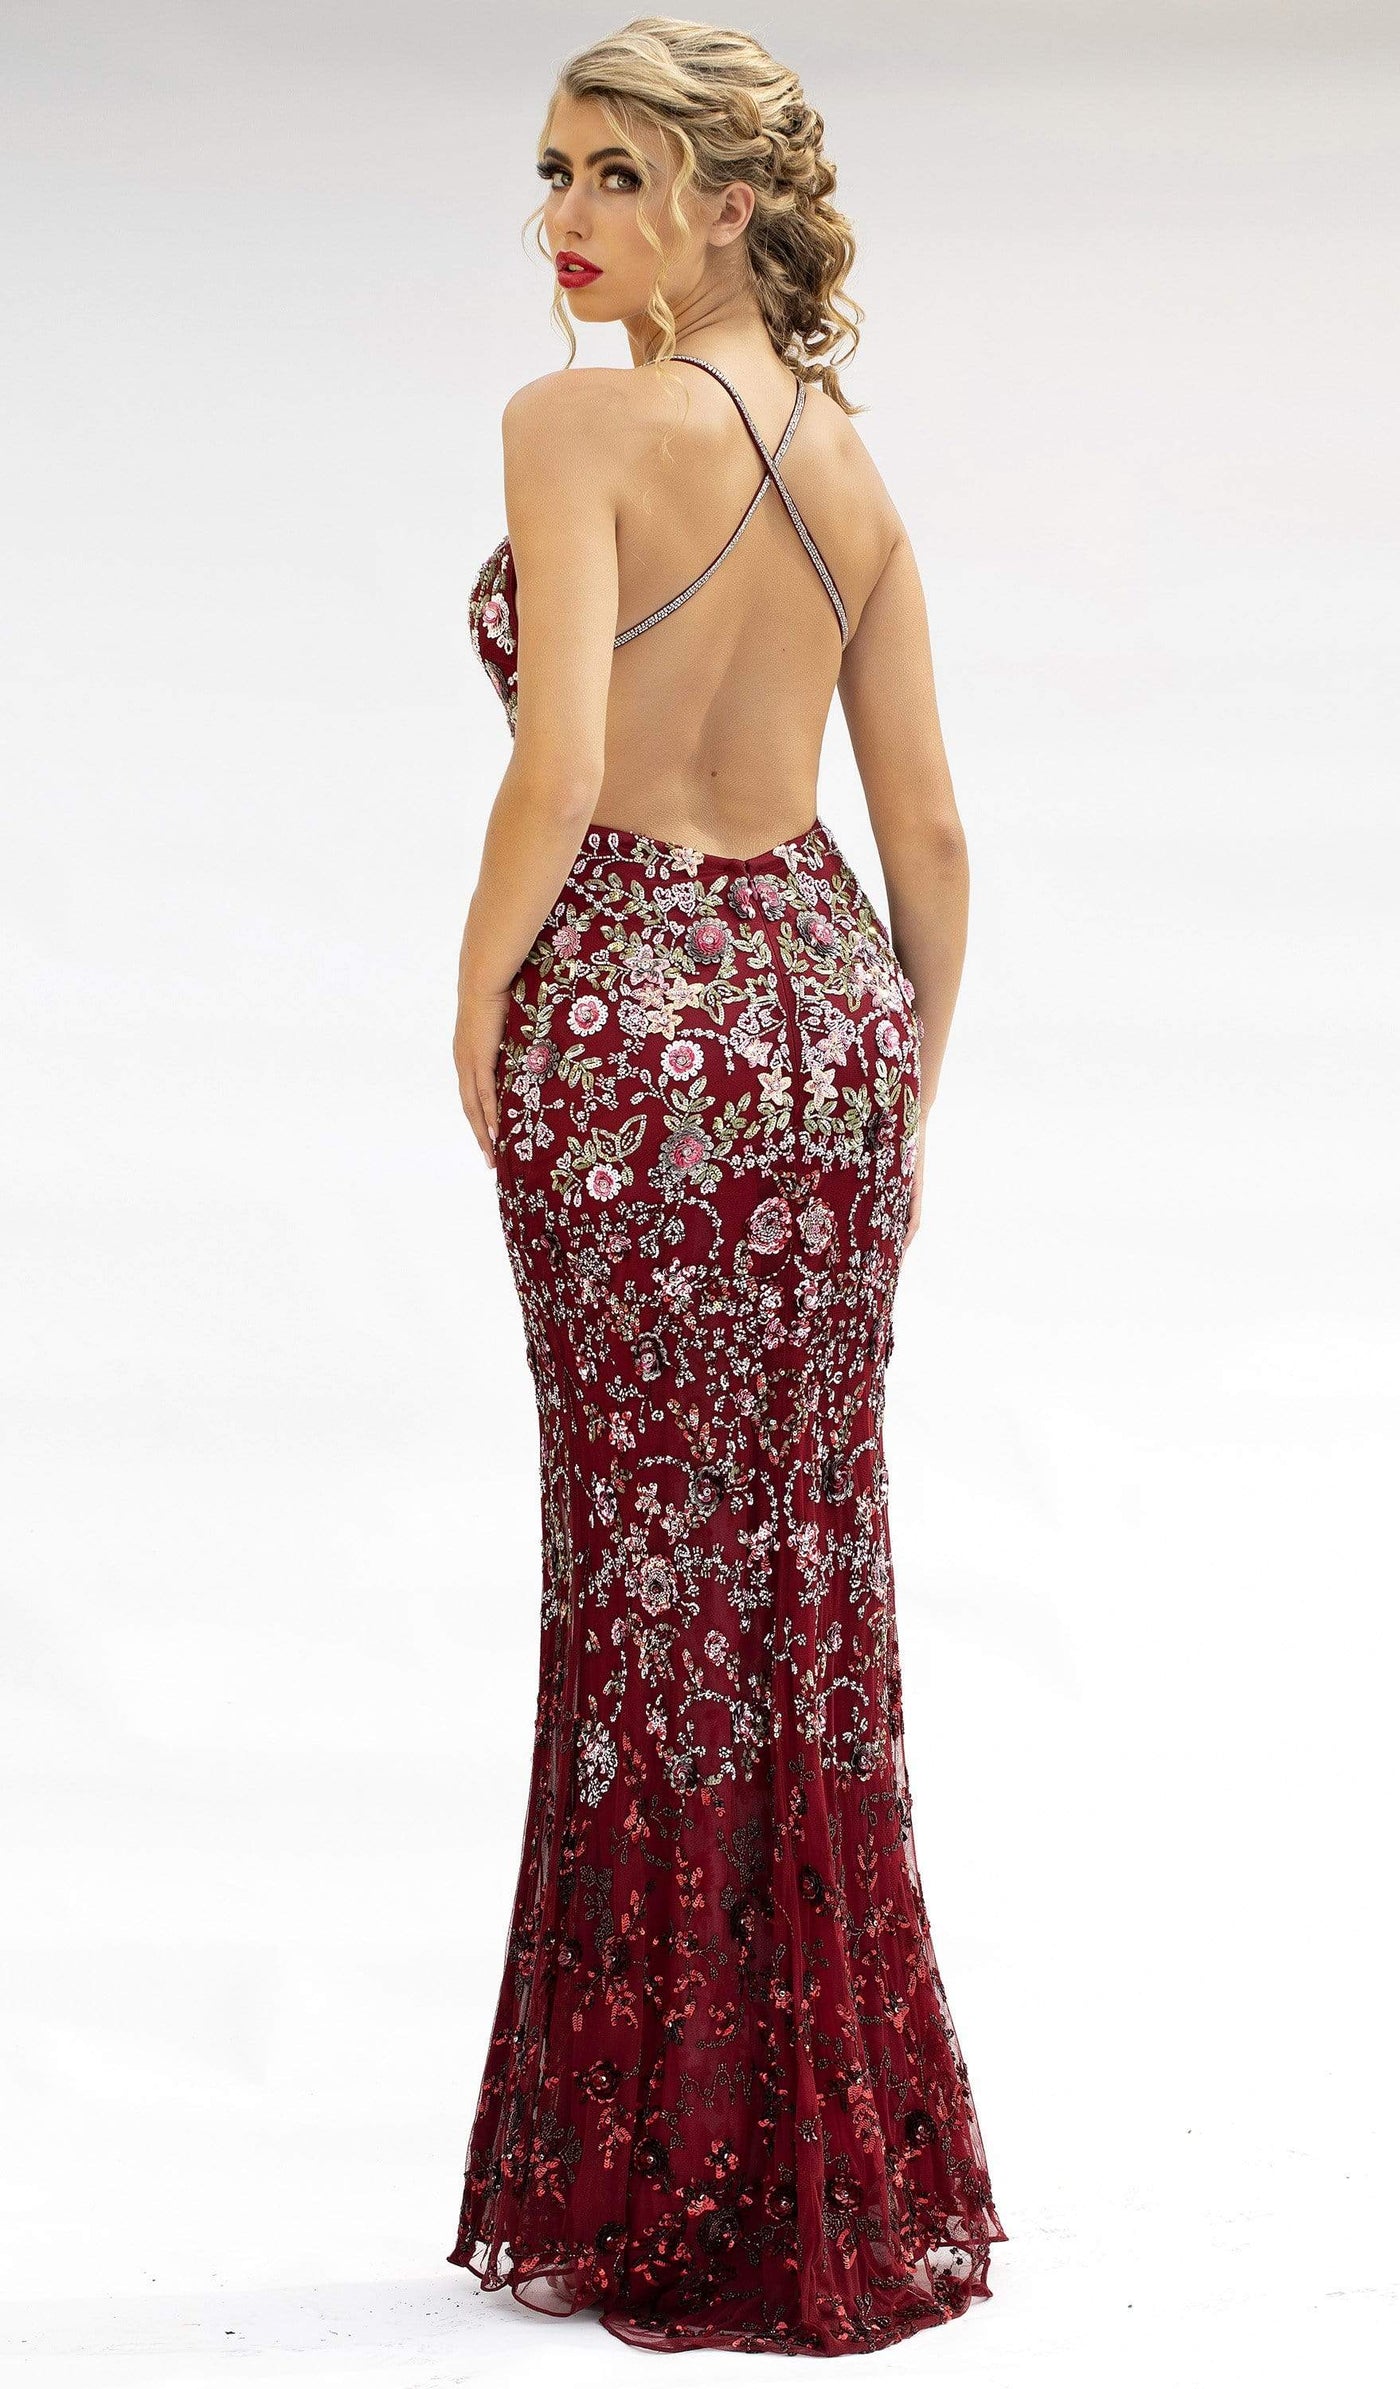 Primavera Couture - 3221 Floral Embellished Backless Sheath Gown Special Occasion Dress